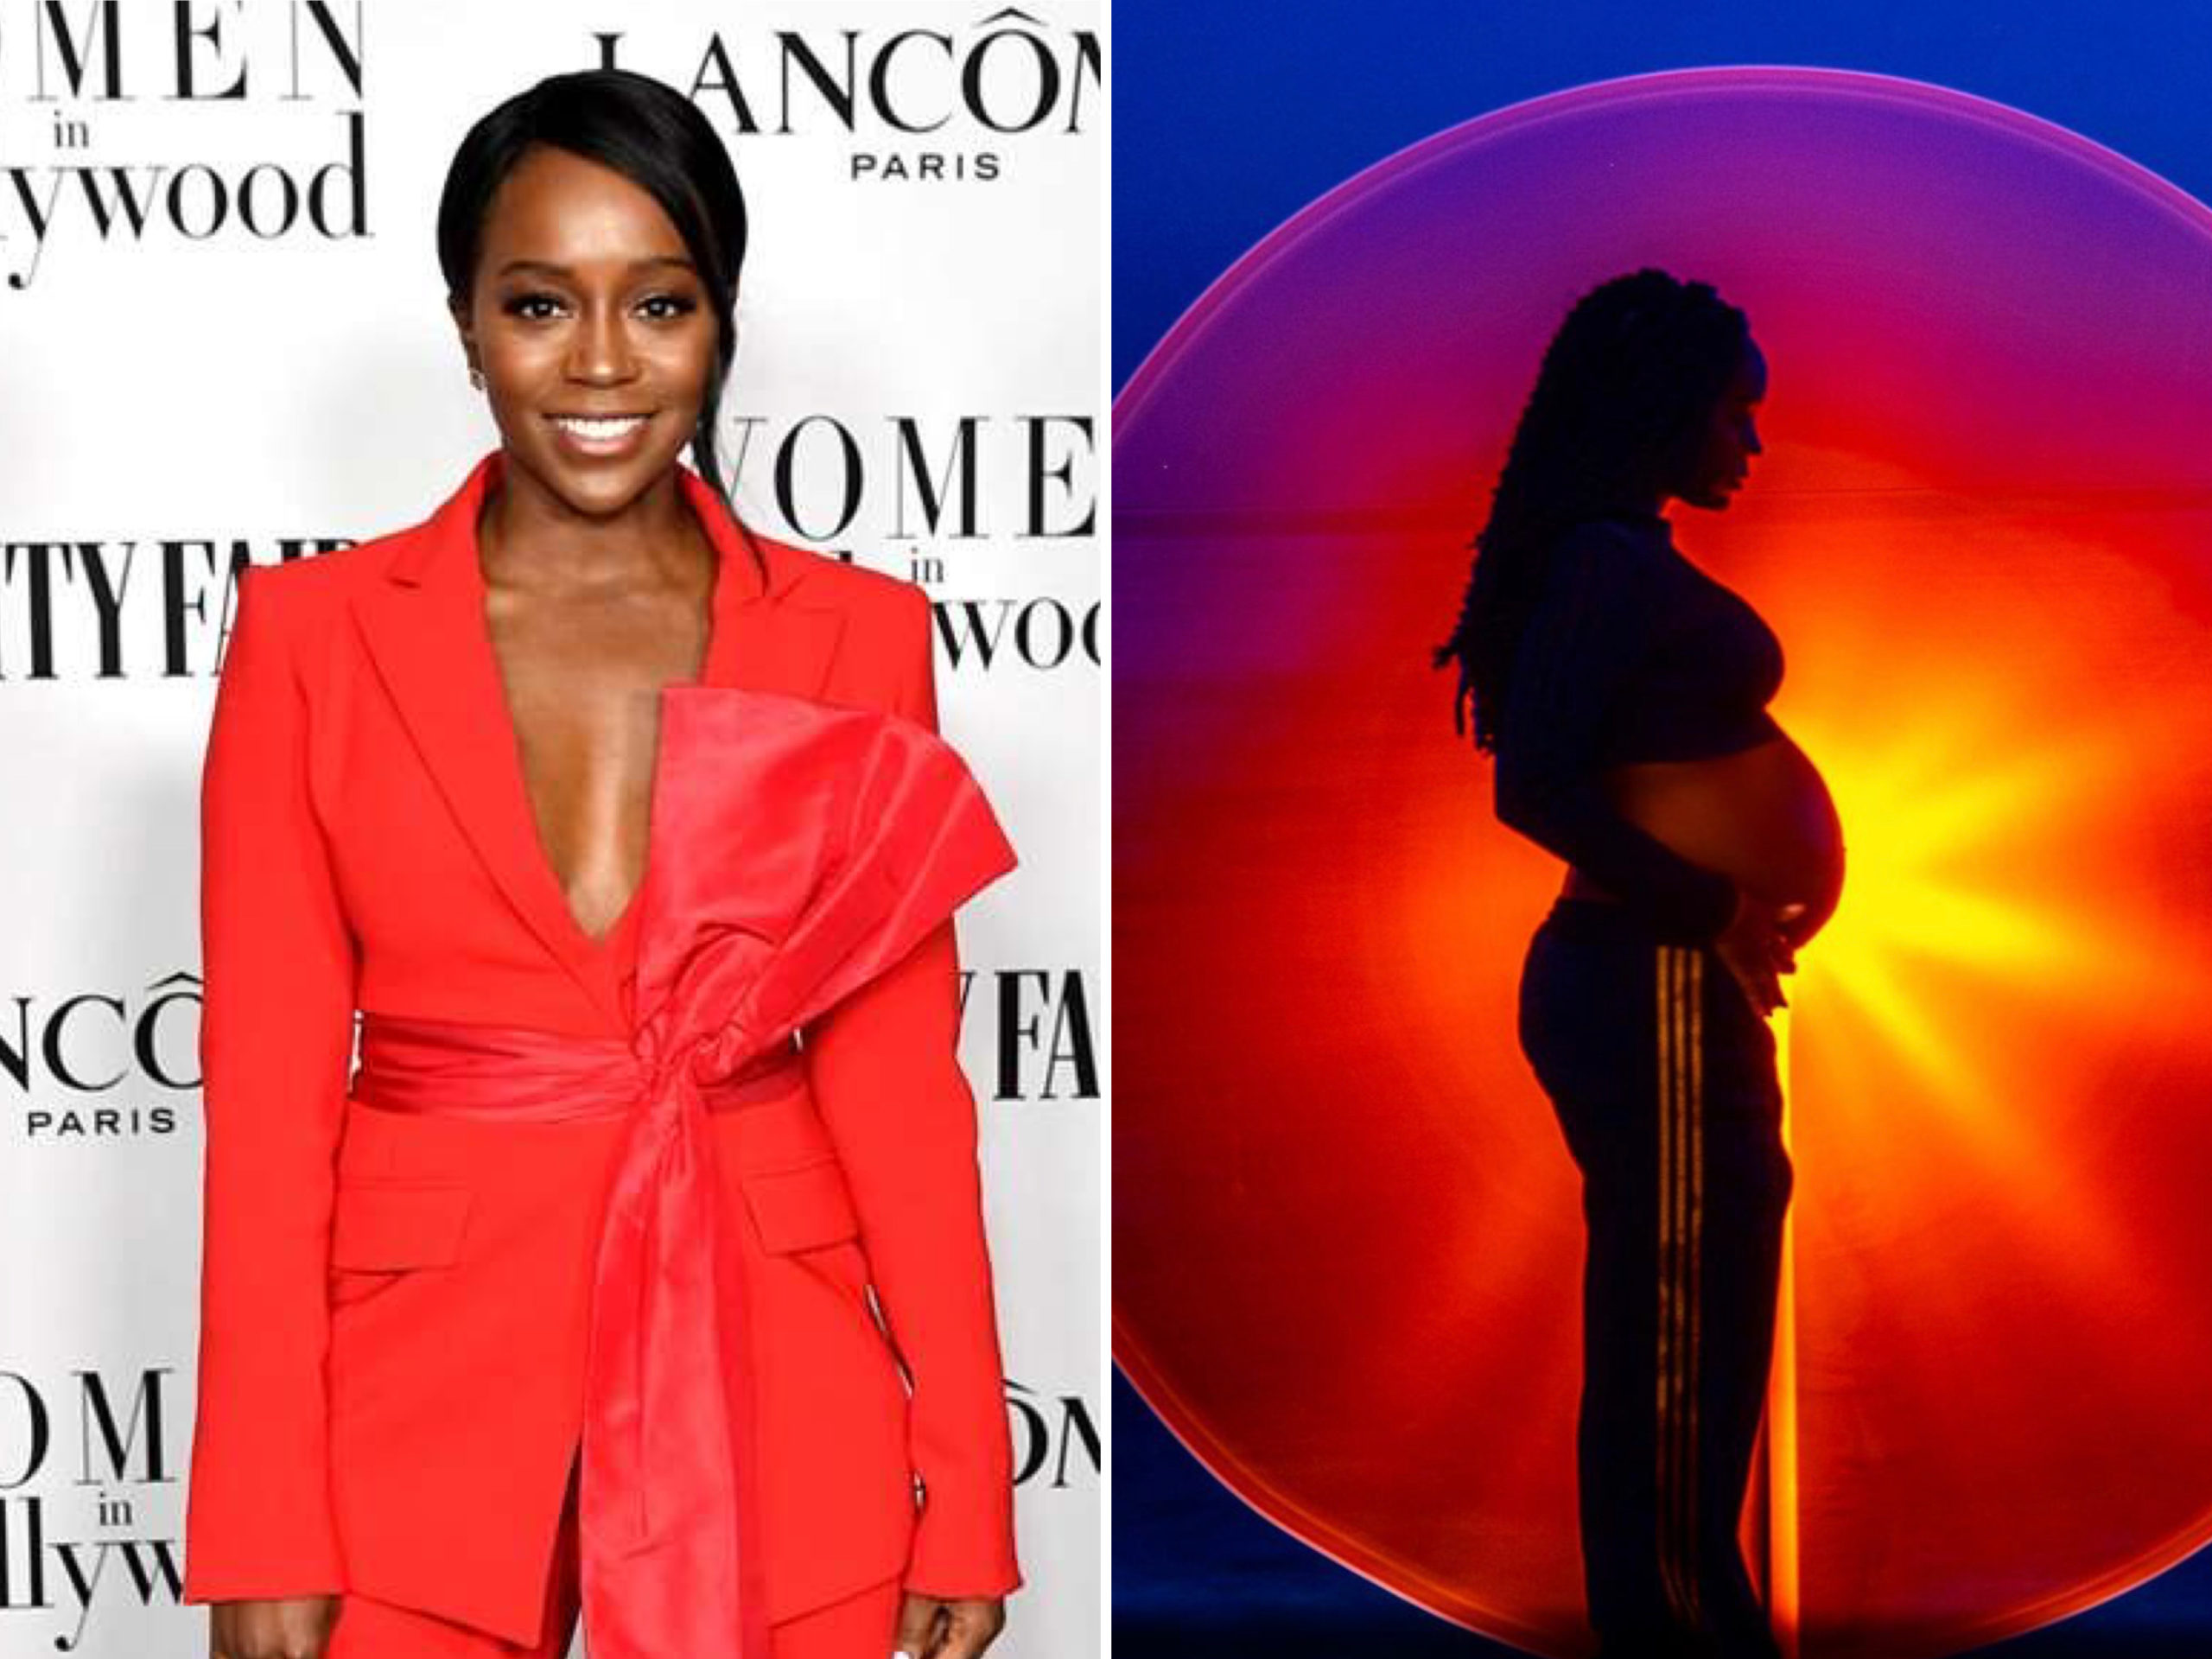 ‘How To Get Away With Murder’ Actress, Aja Naomi King Reveals She's Pregnant After Suffering Two Miscarriages